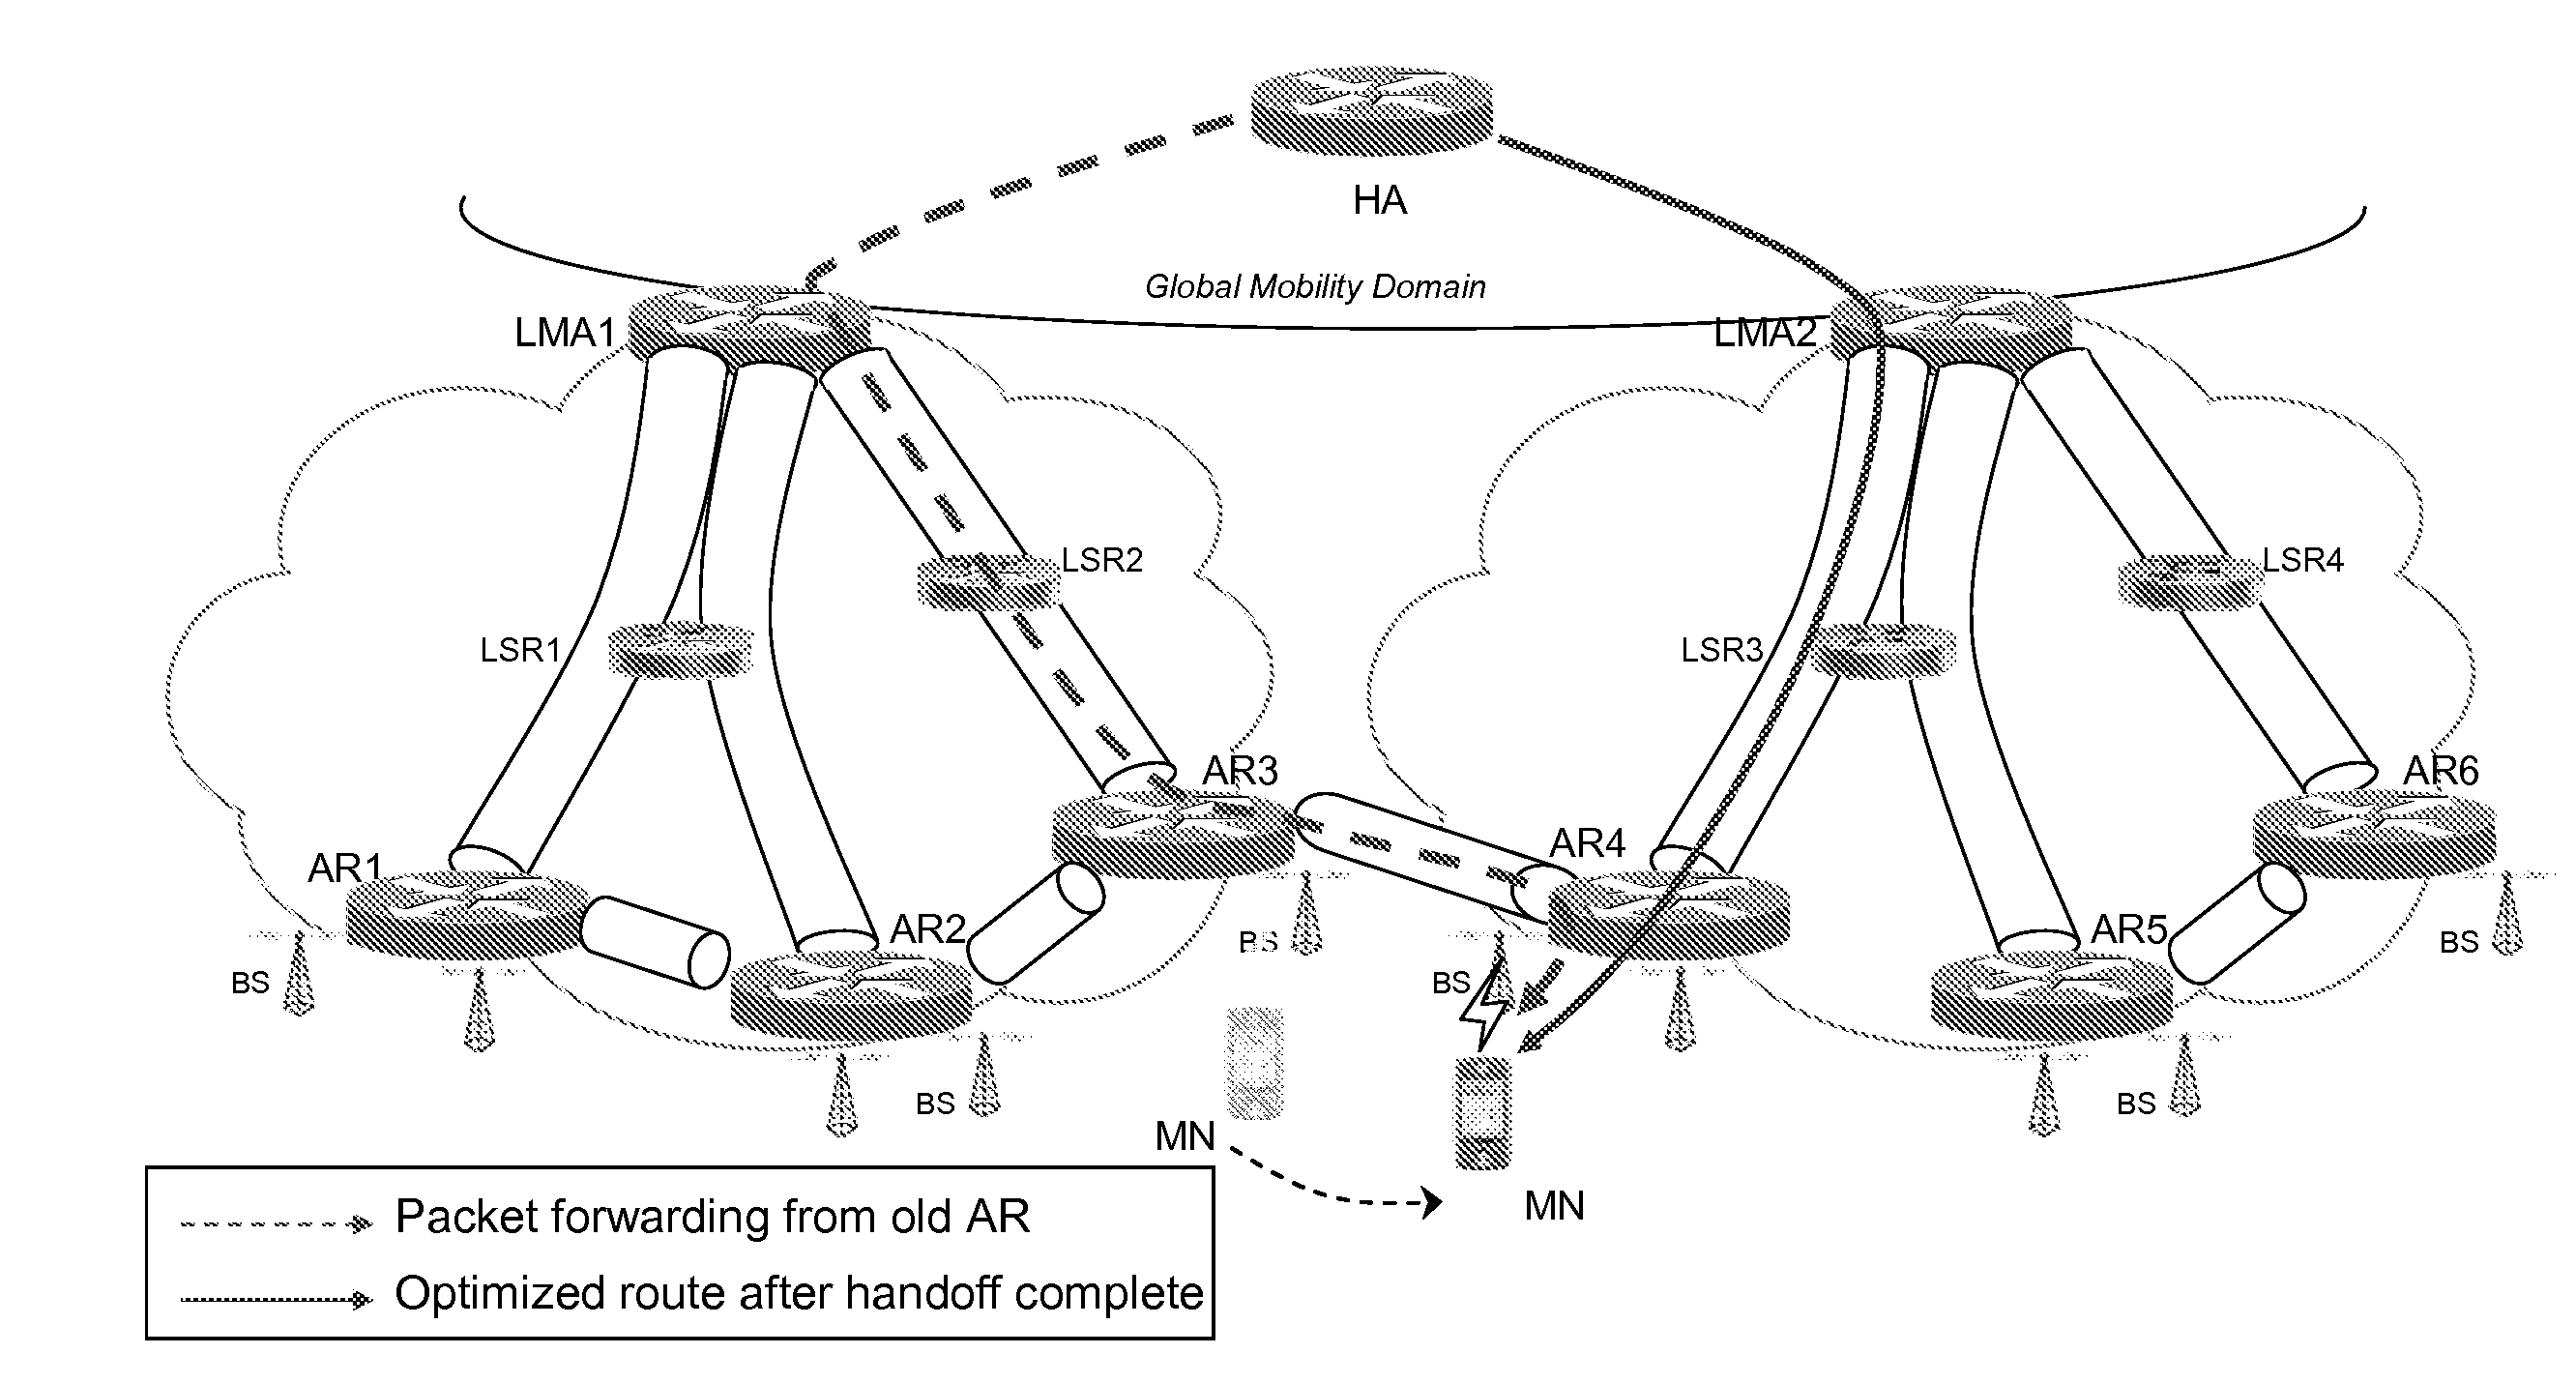 Handover in a mobile network domain